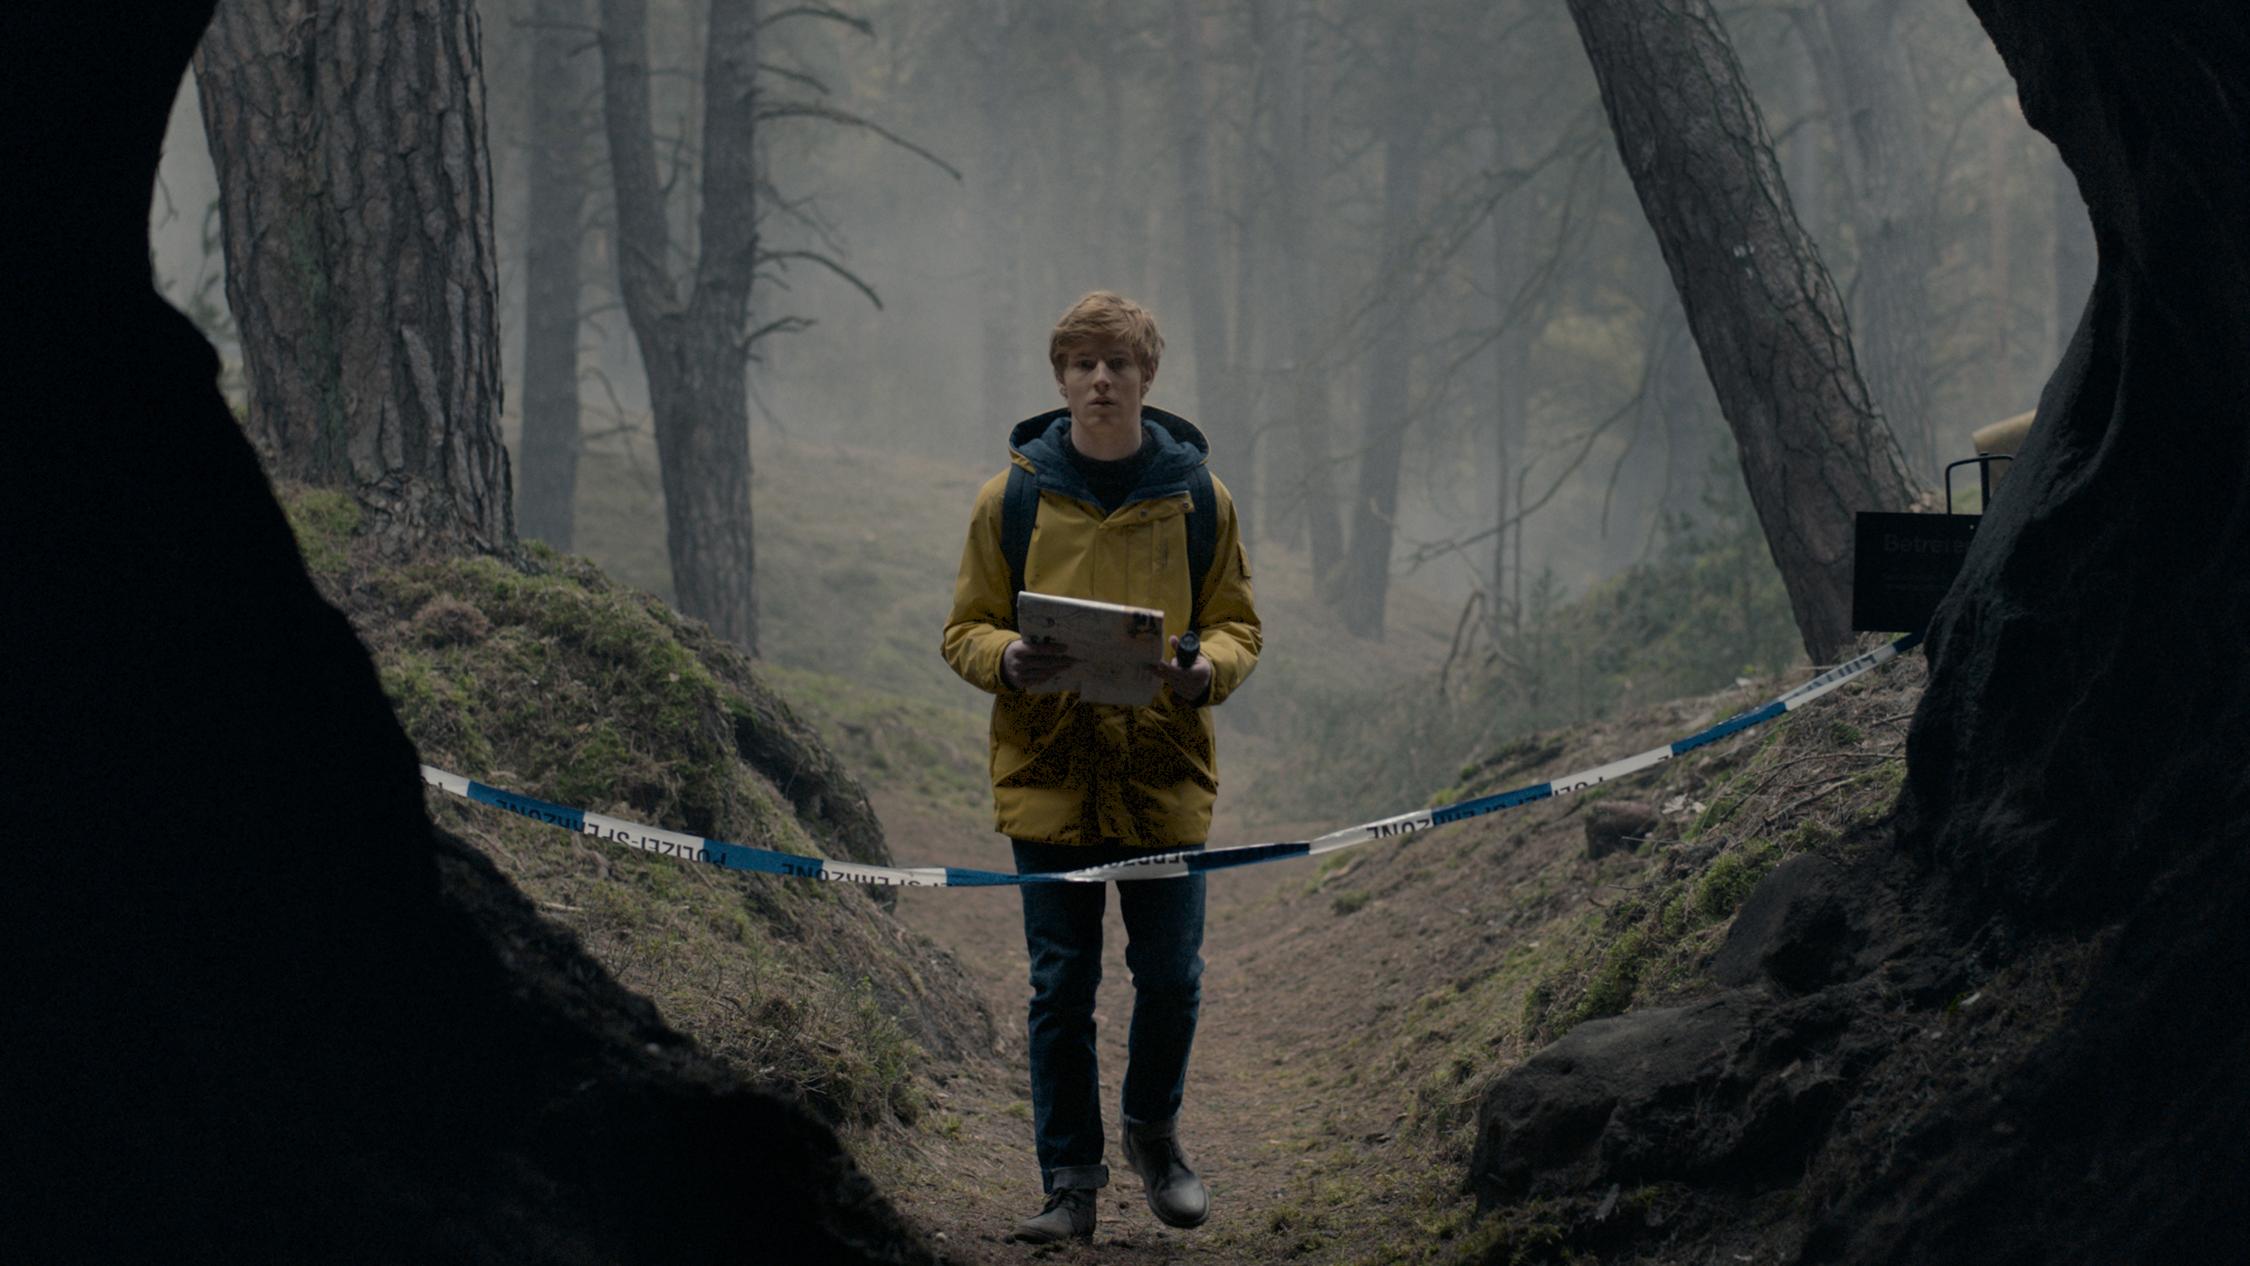 A boy stands in woods